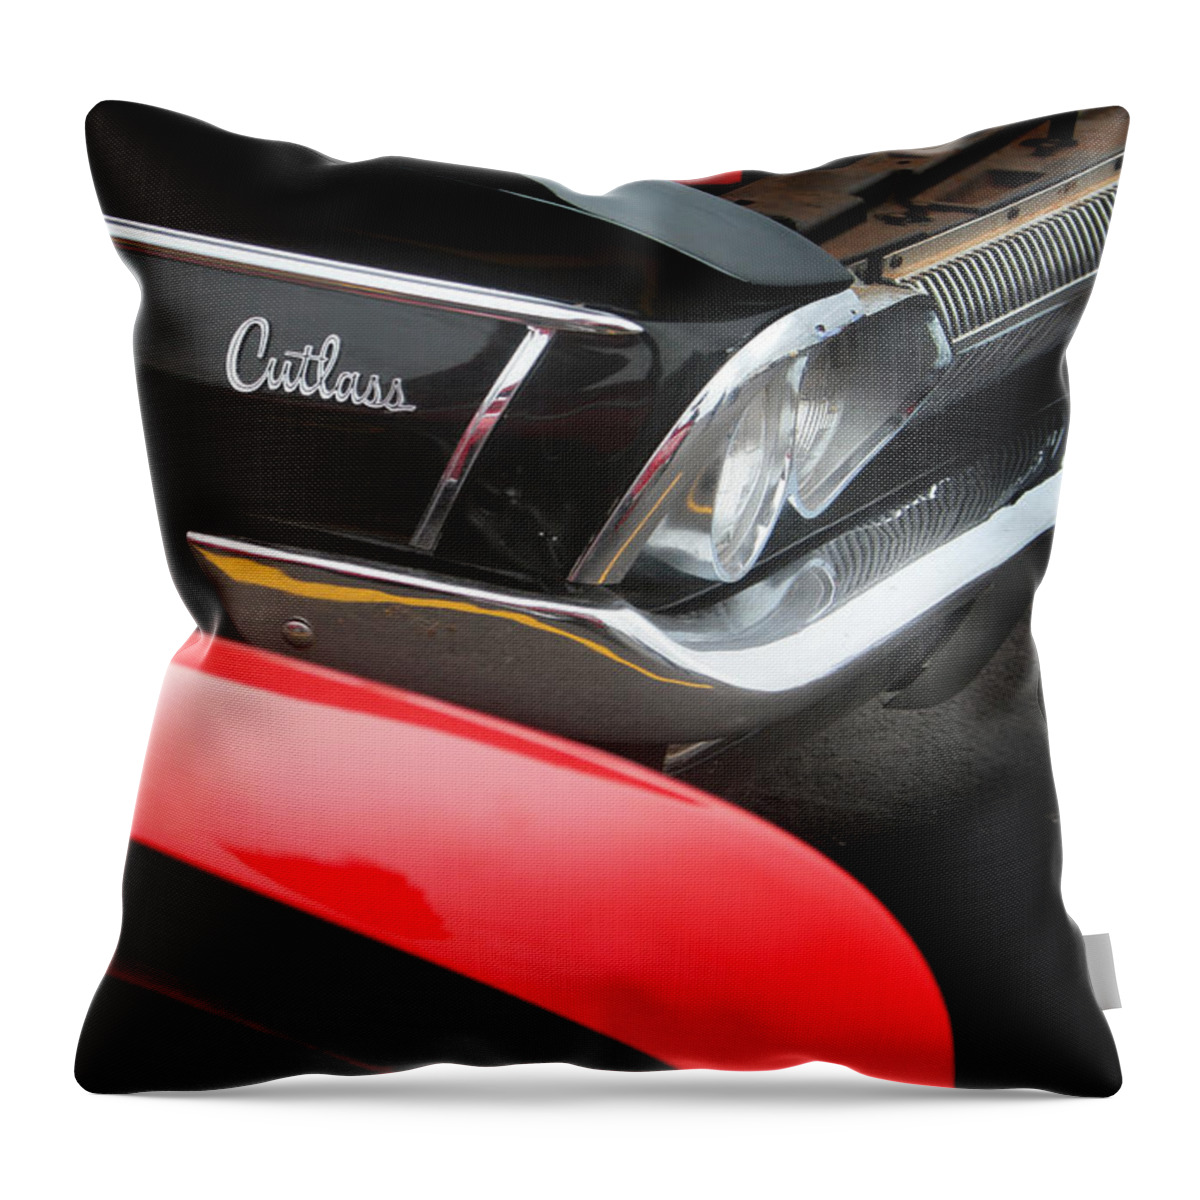 Classic Automobile Throw Pillow featuring the photograph Cutlass Classic by Toni Hopper